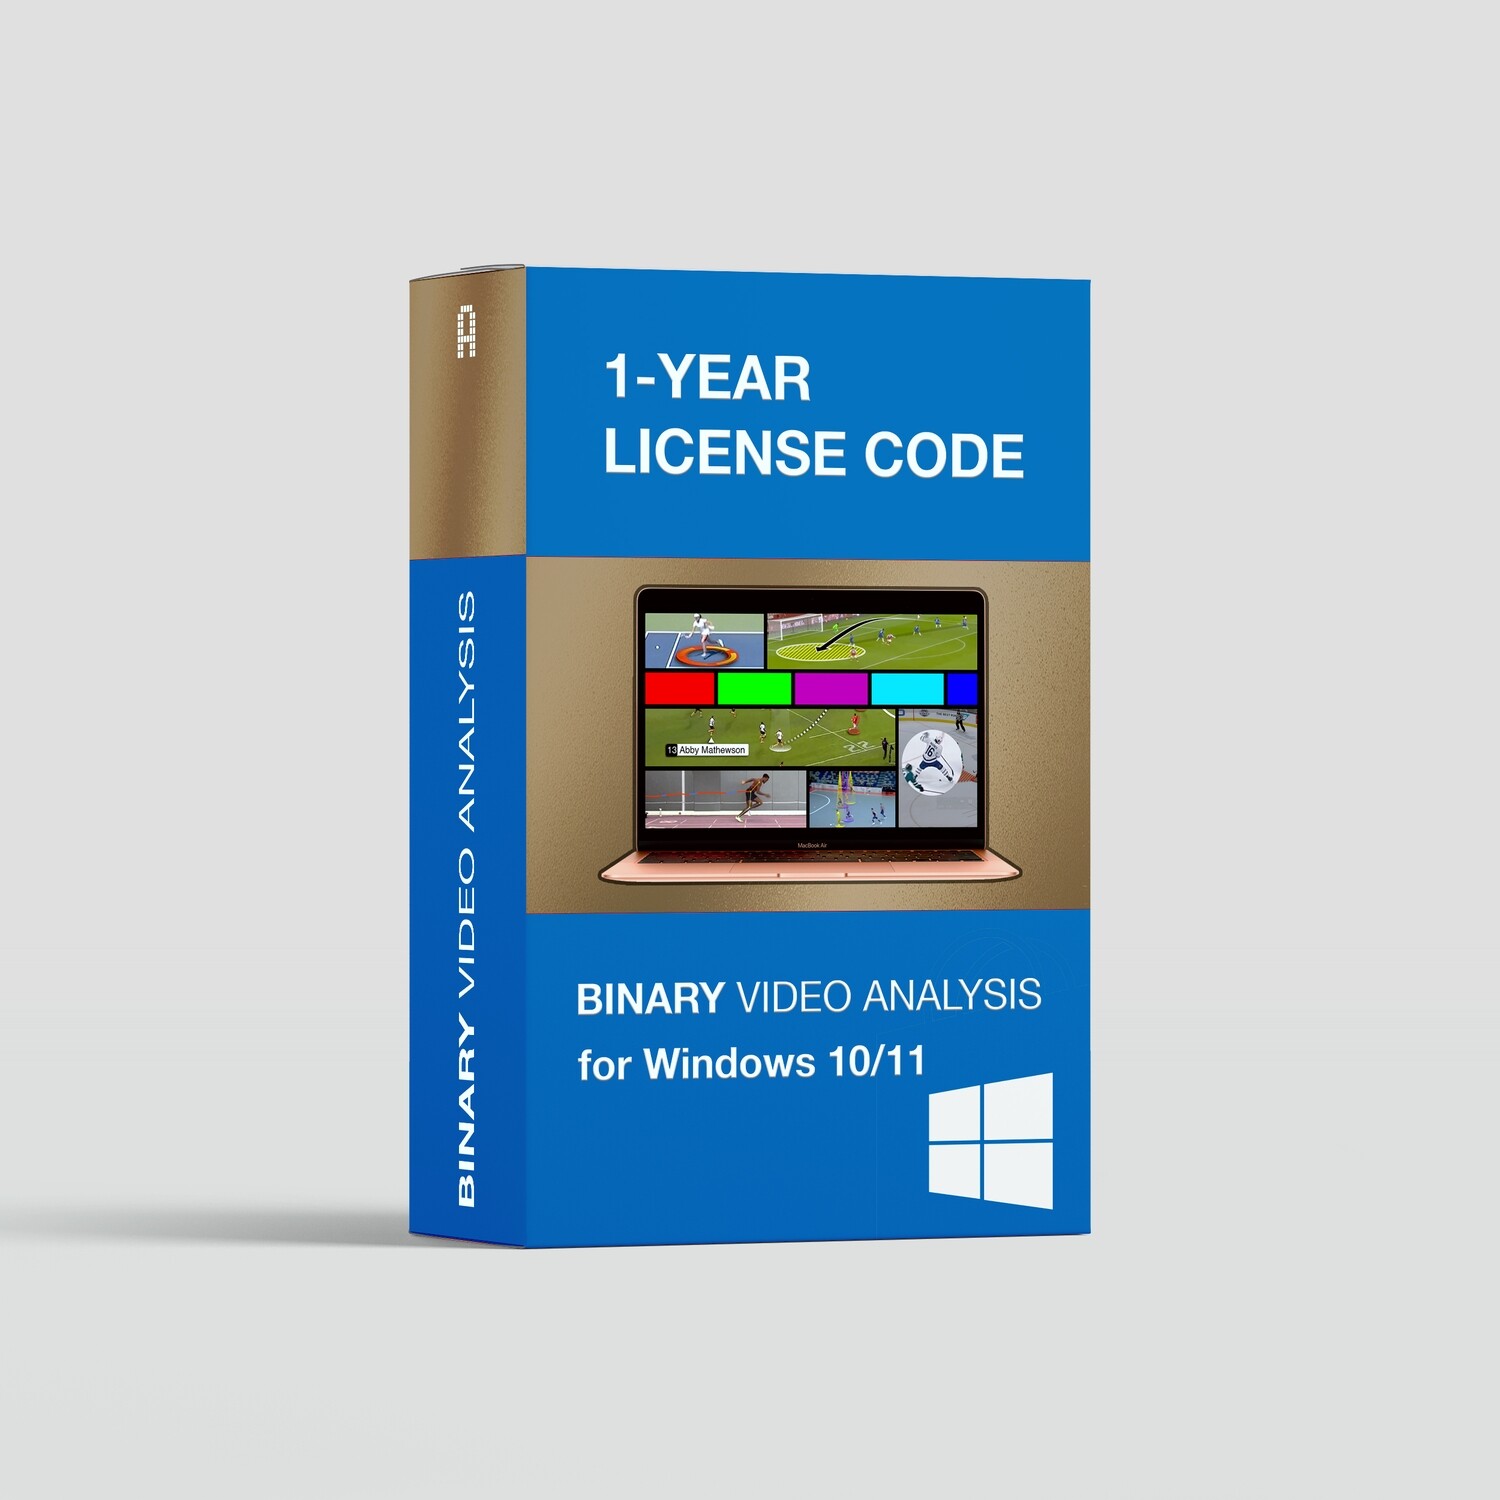 Video Analysis 1-year License Code for Windows 10/11